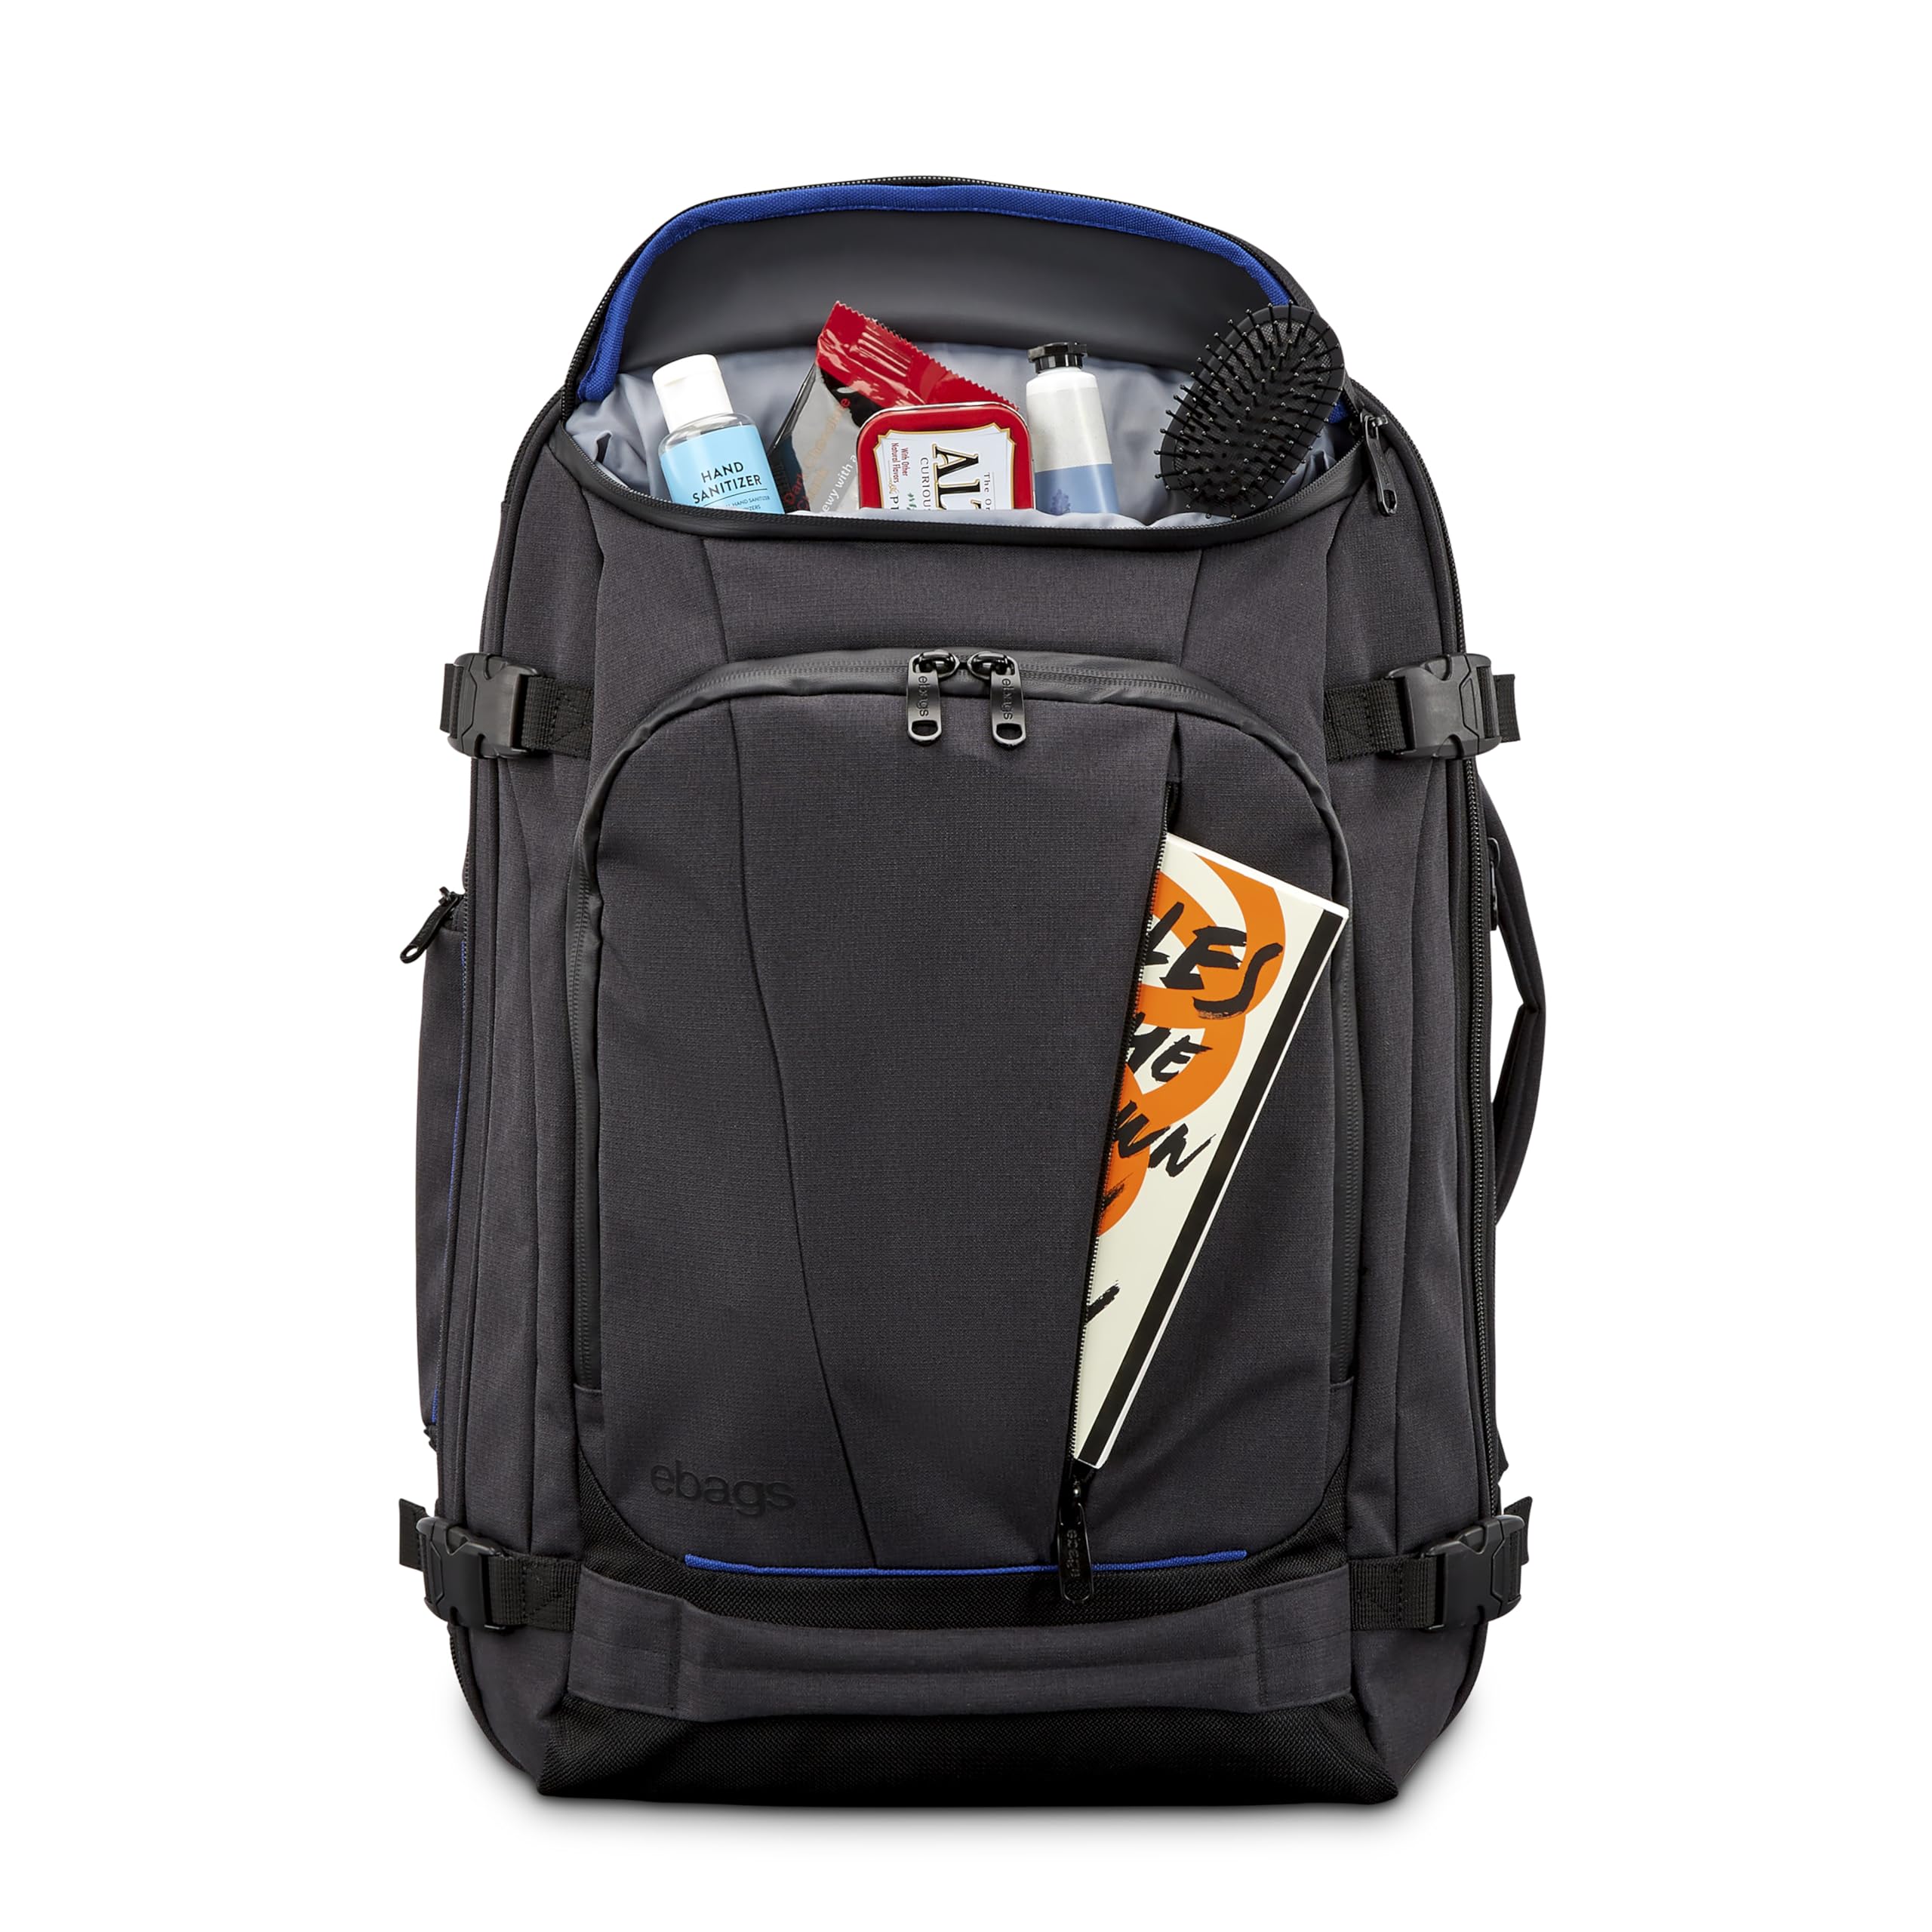 eBags Mother Lode DLX Travel Backpack - Bags (Black/Blue)